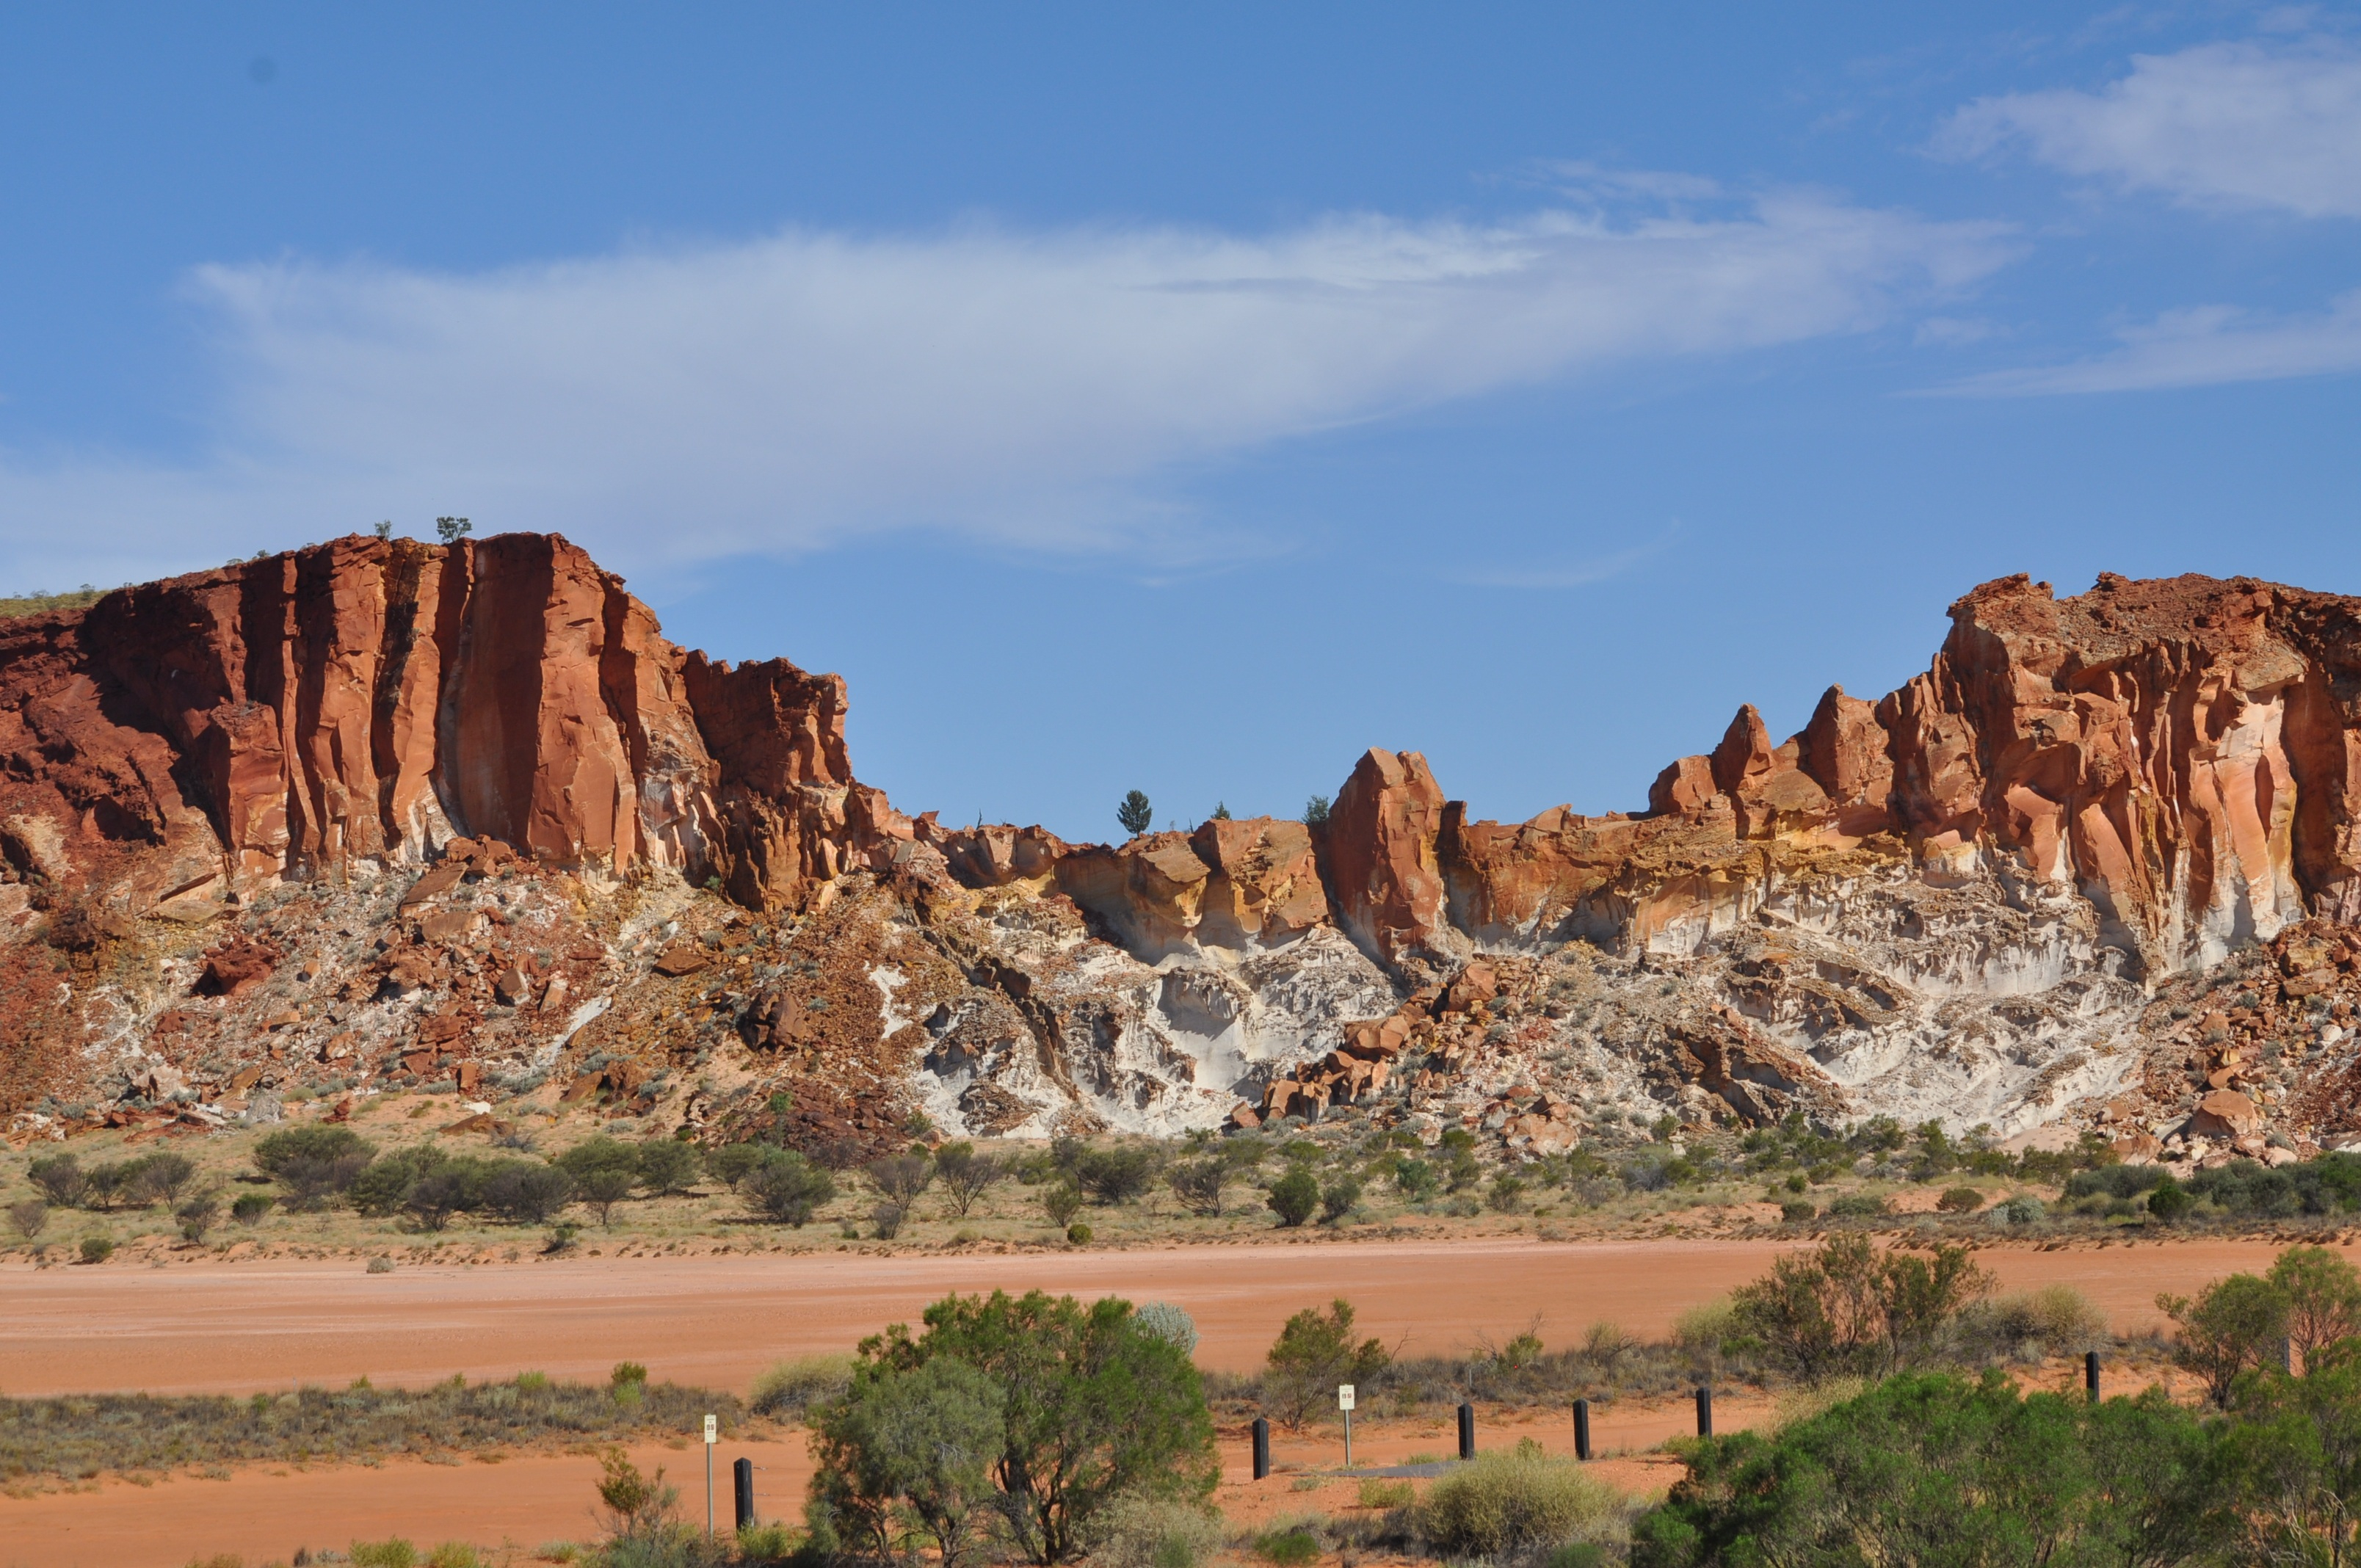 3216x2136 Rock formations, Alice Springs Northern Territory Australia / Red Centre